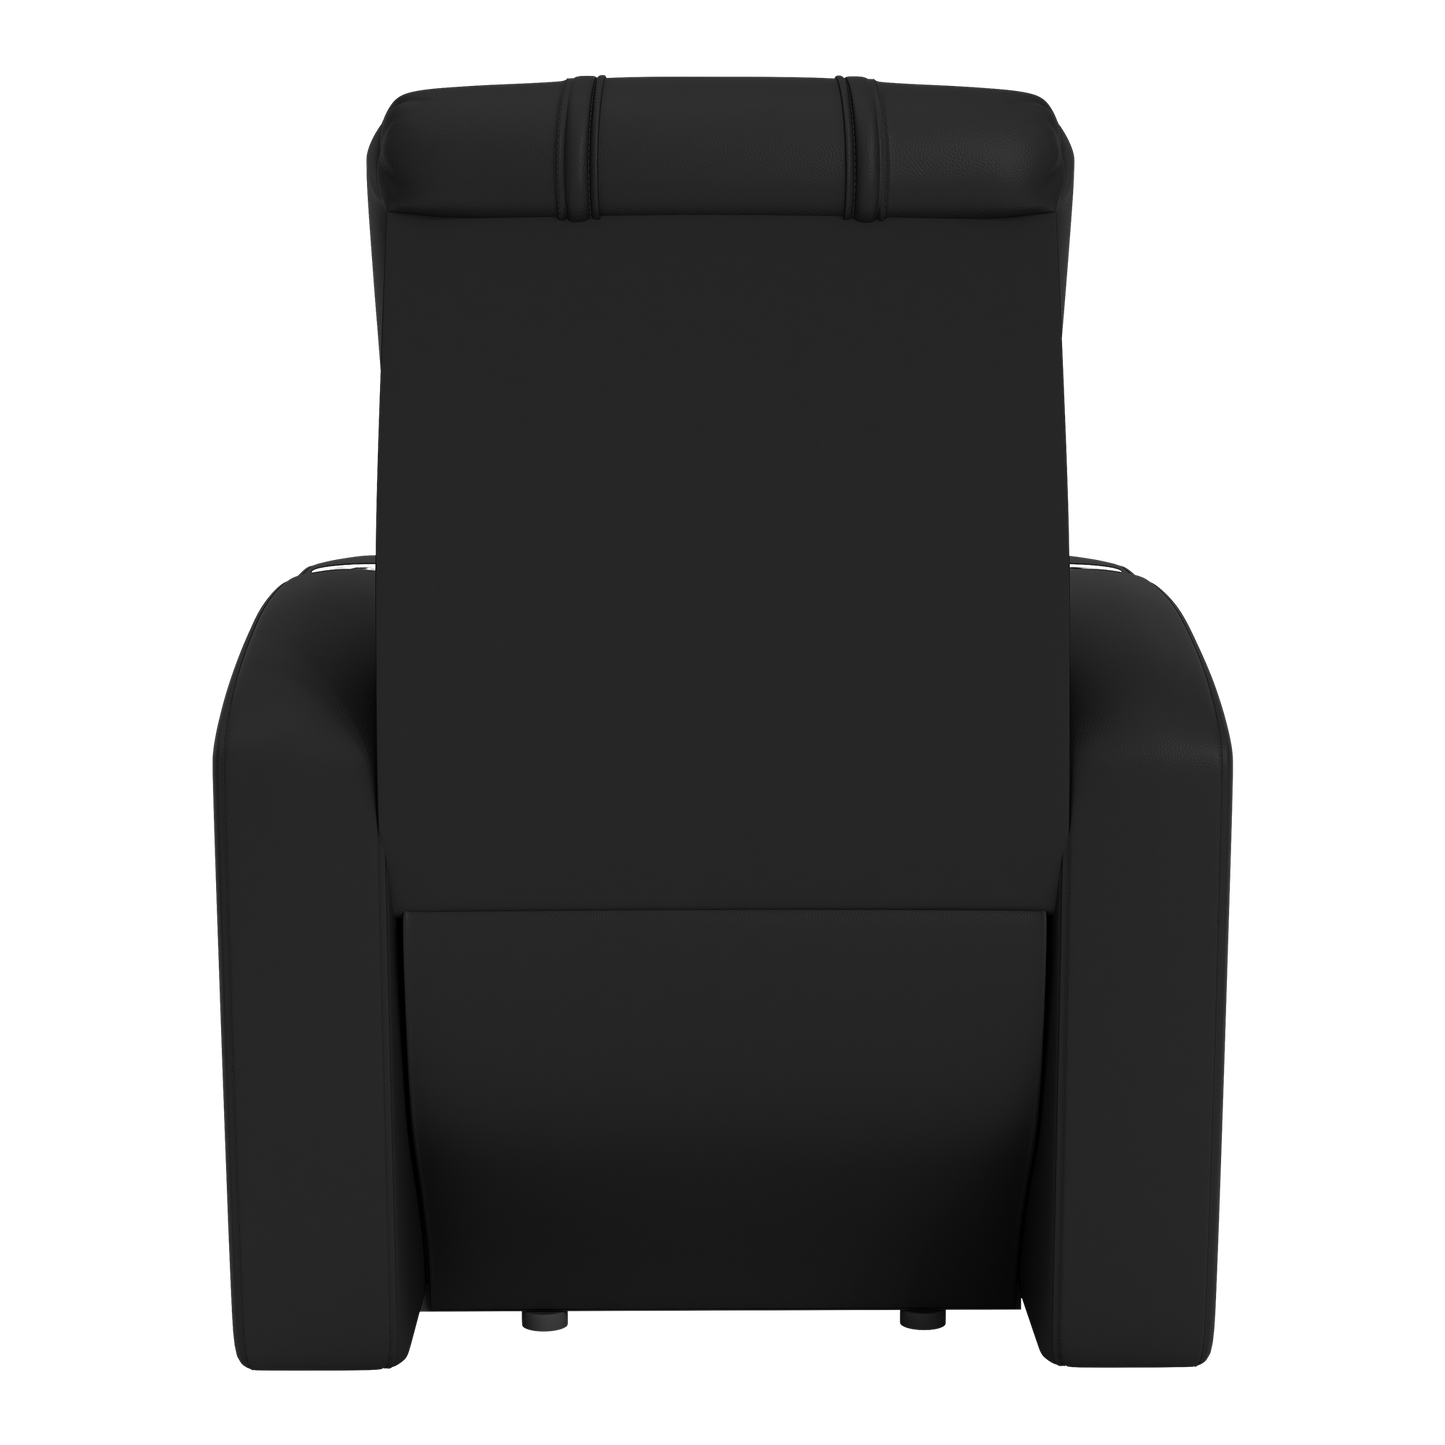 Stealth Recliner with Ohio State Primary Logo